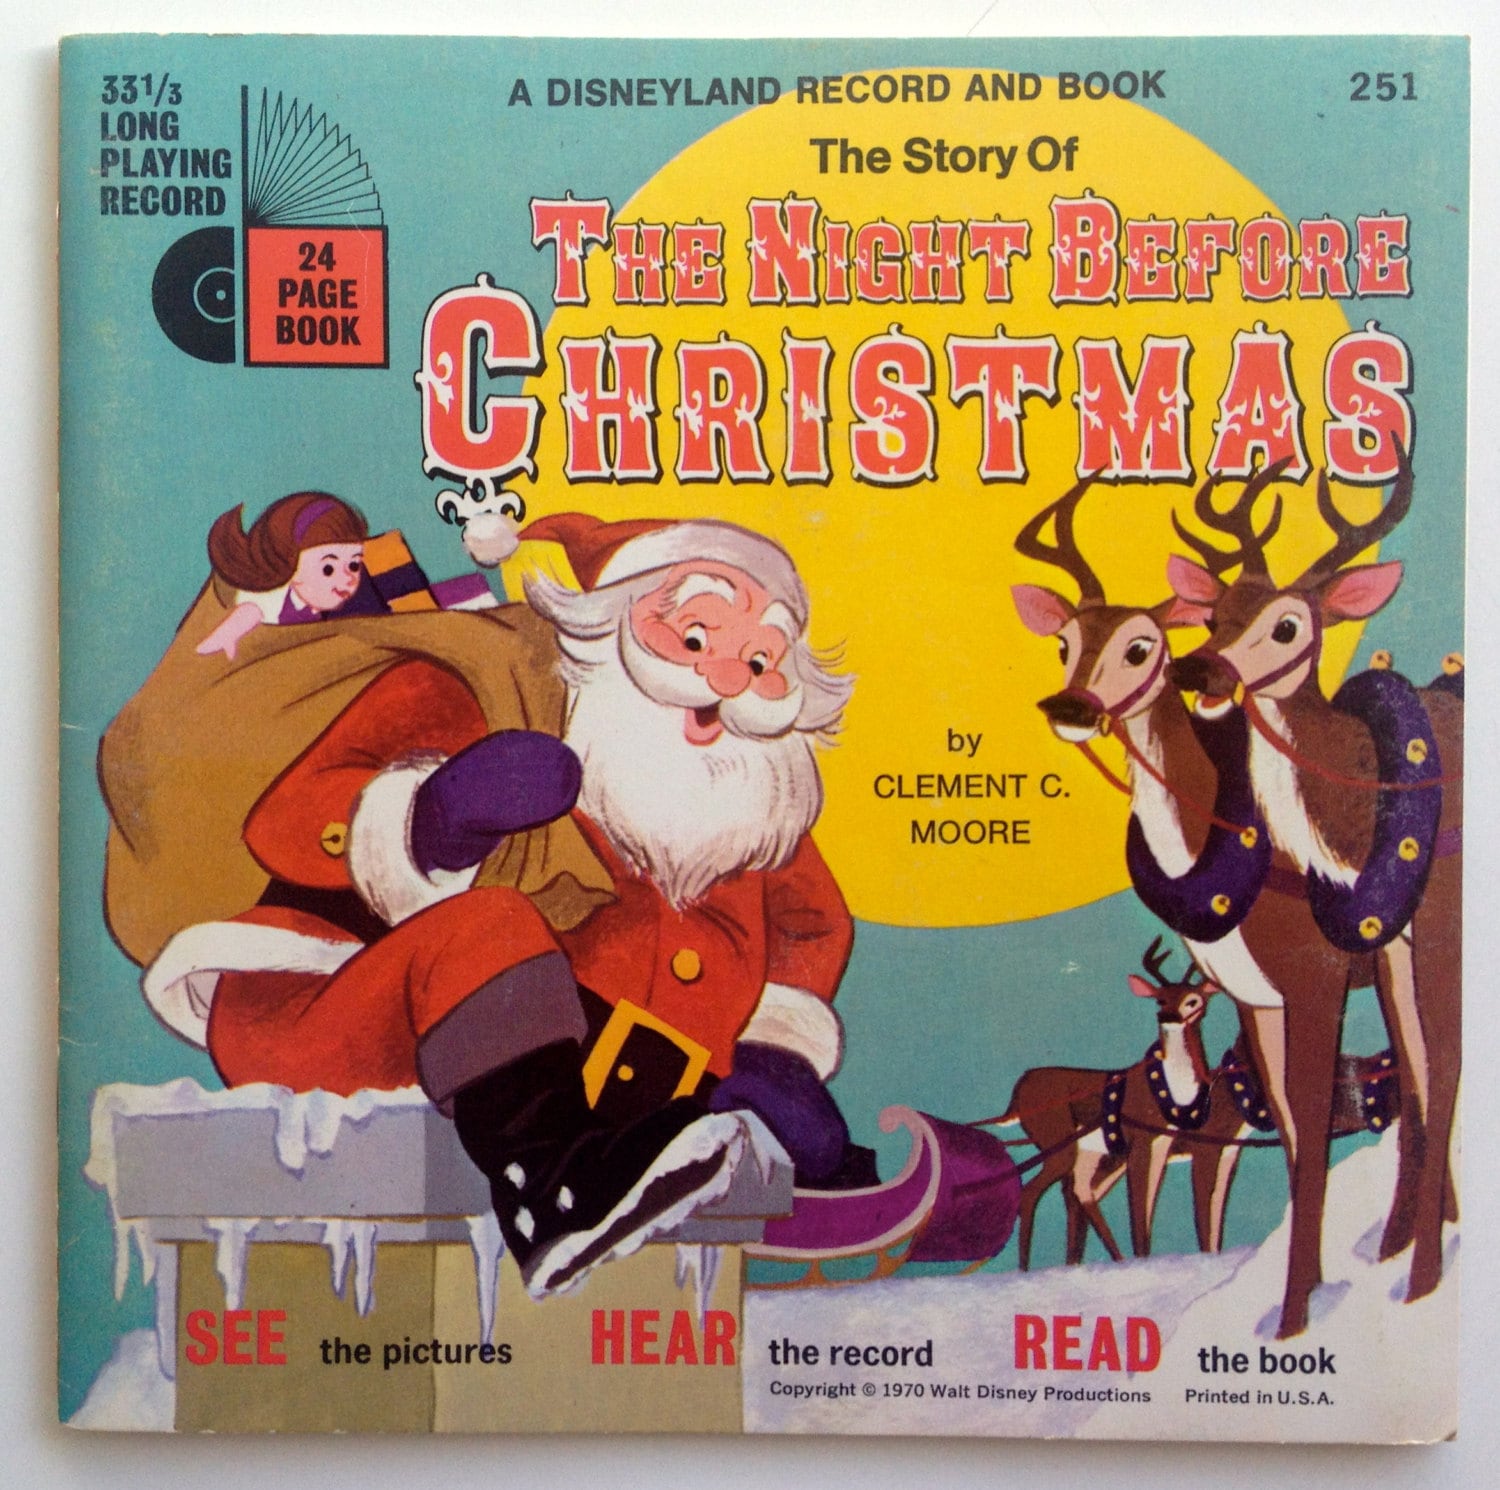 The Story of The Night Before Christmas 7' Vinyl Record